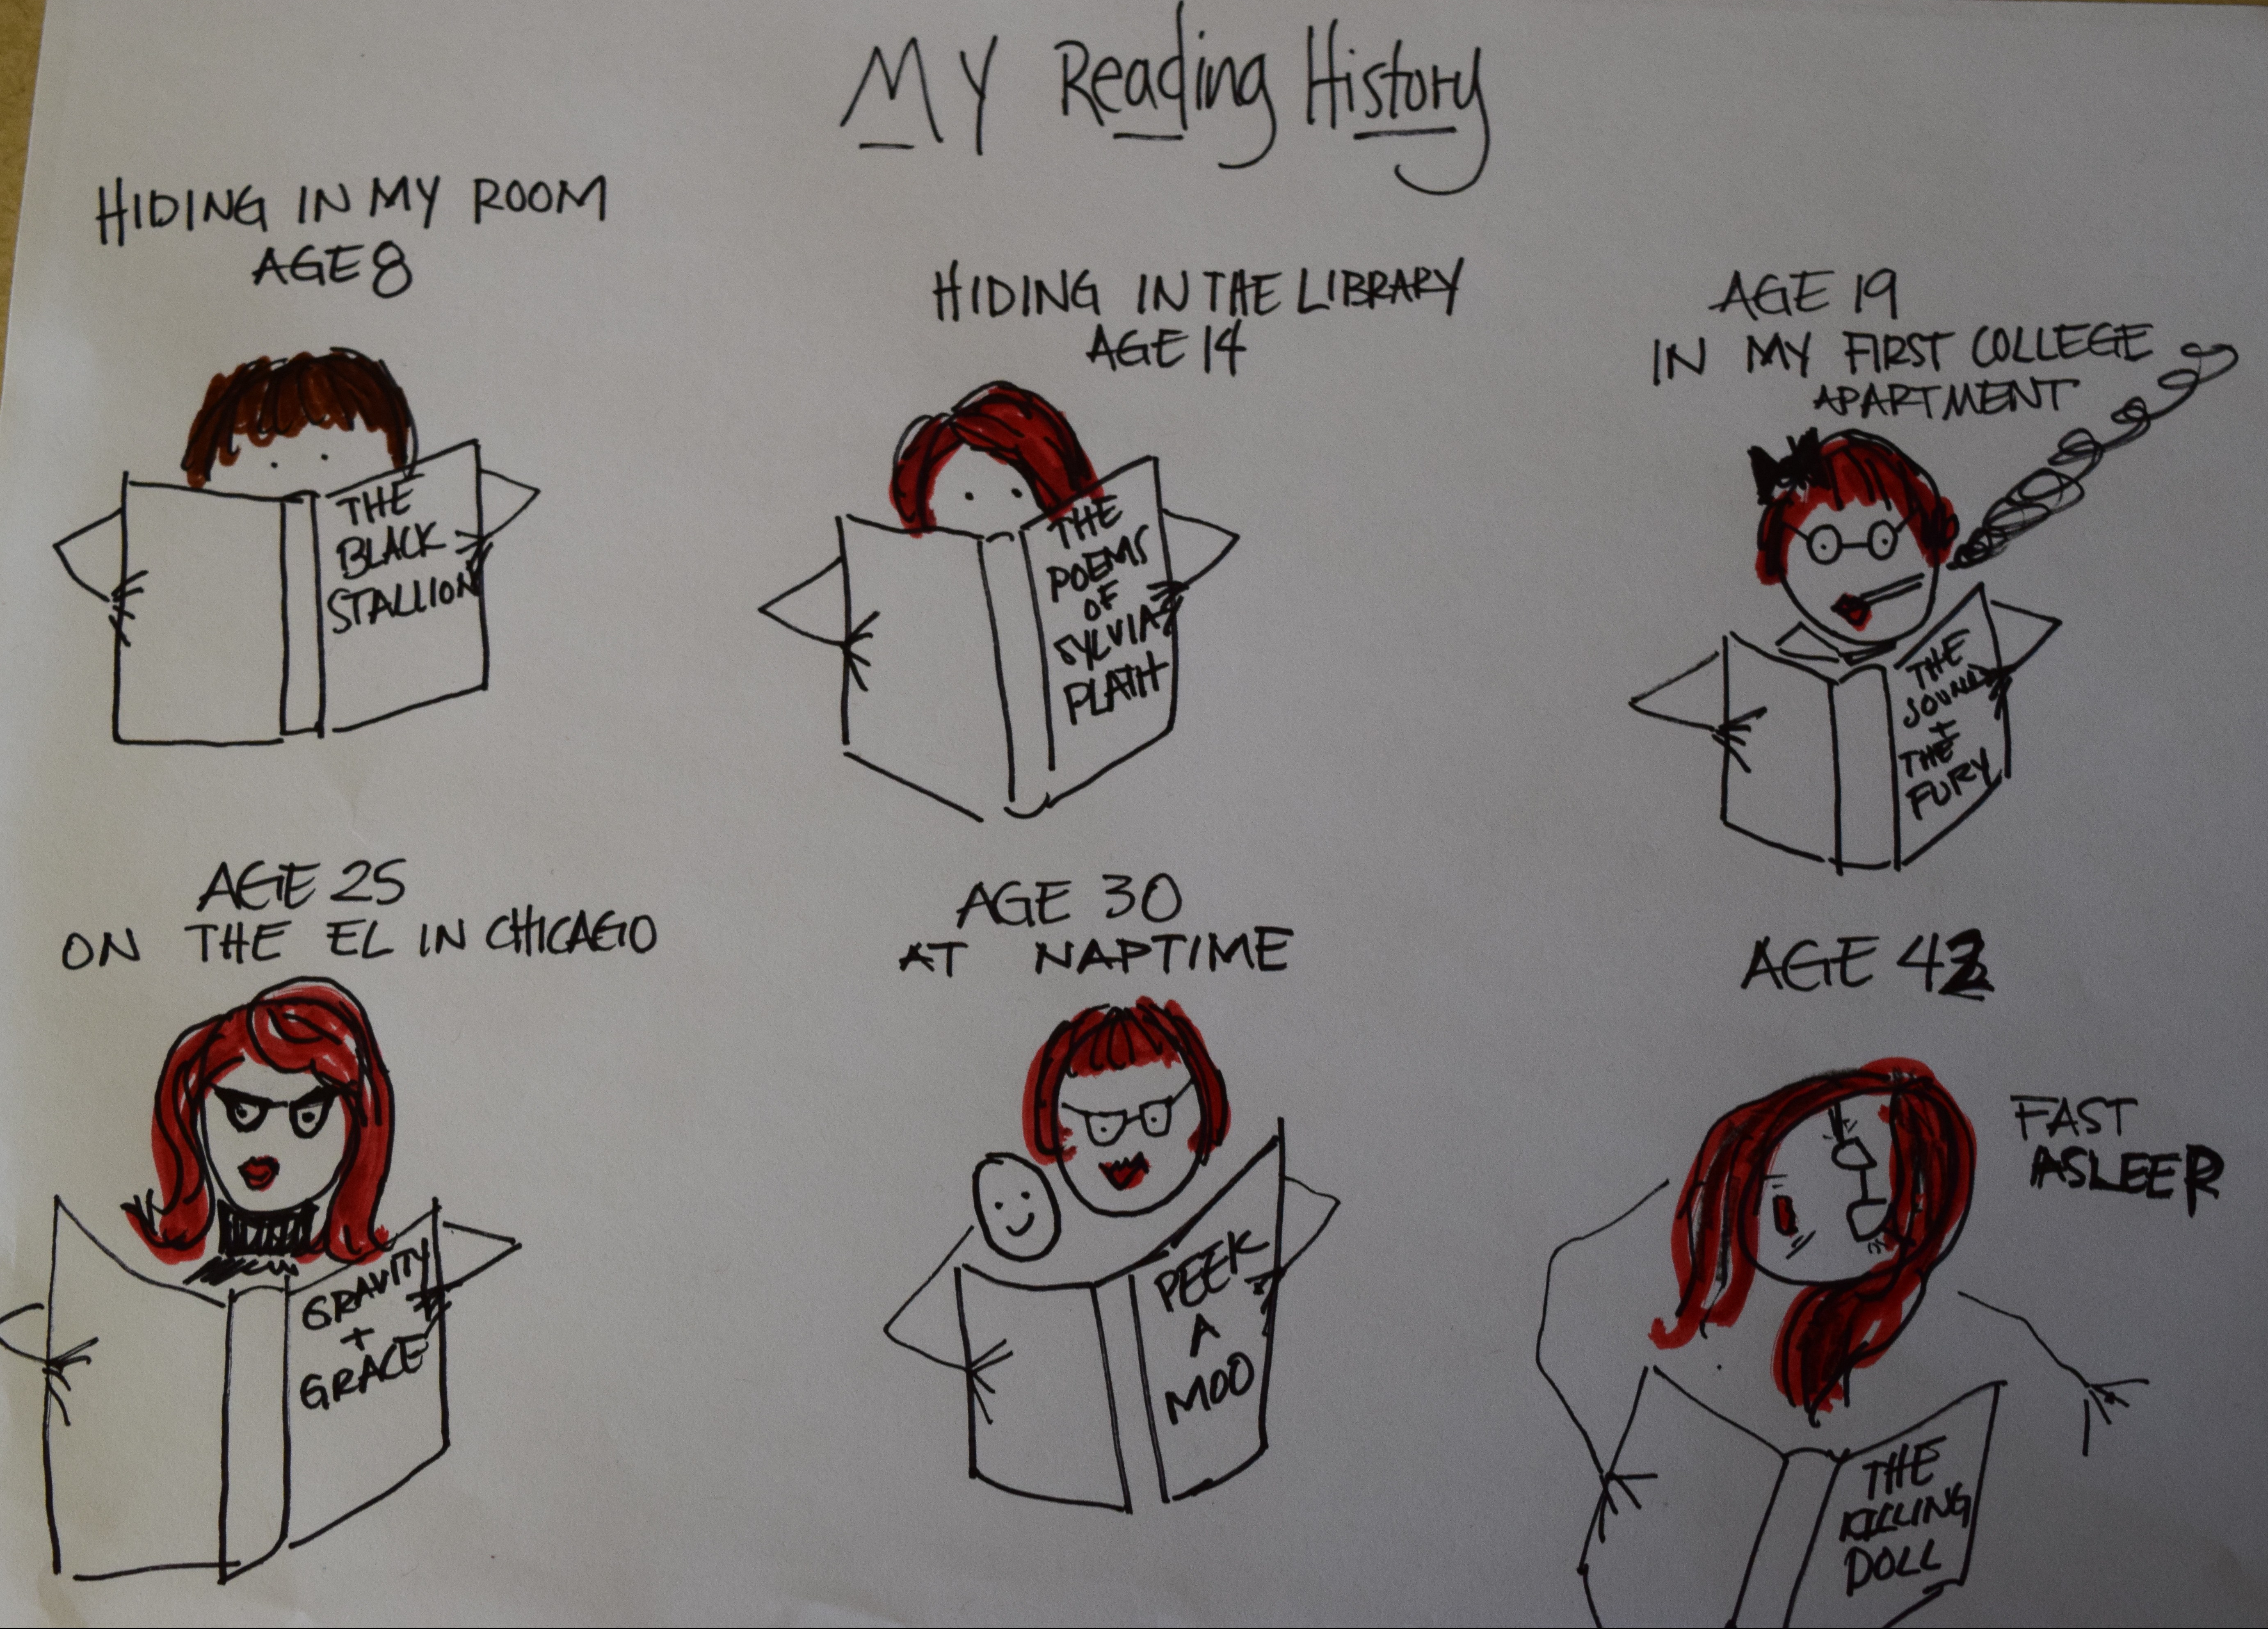 A comic illustrating a lifetime of reading.